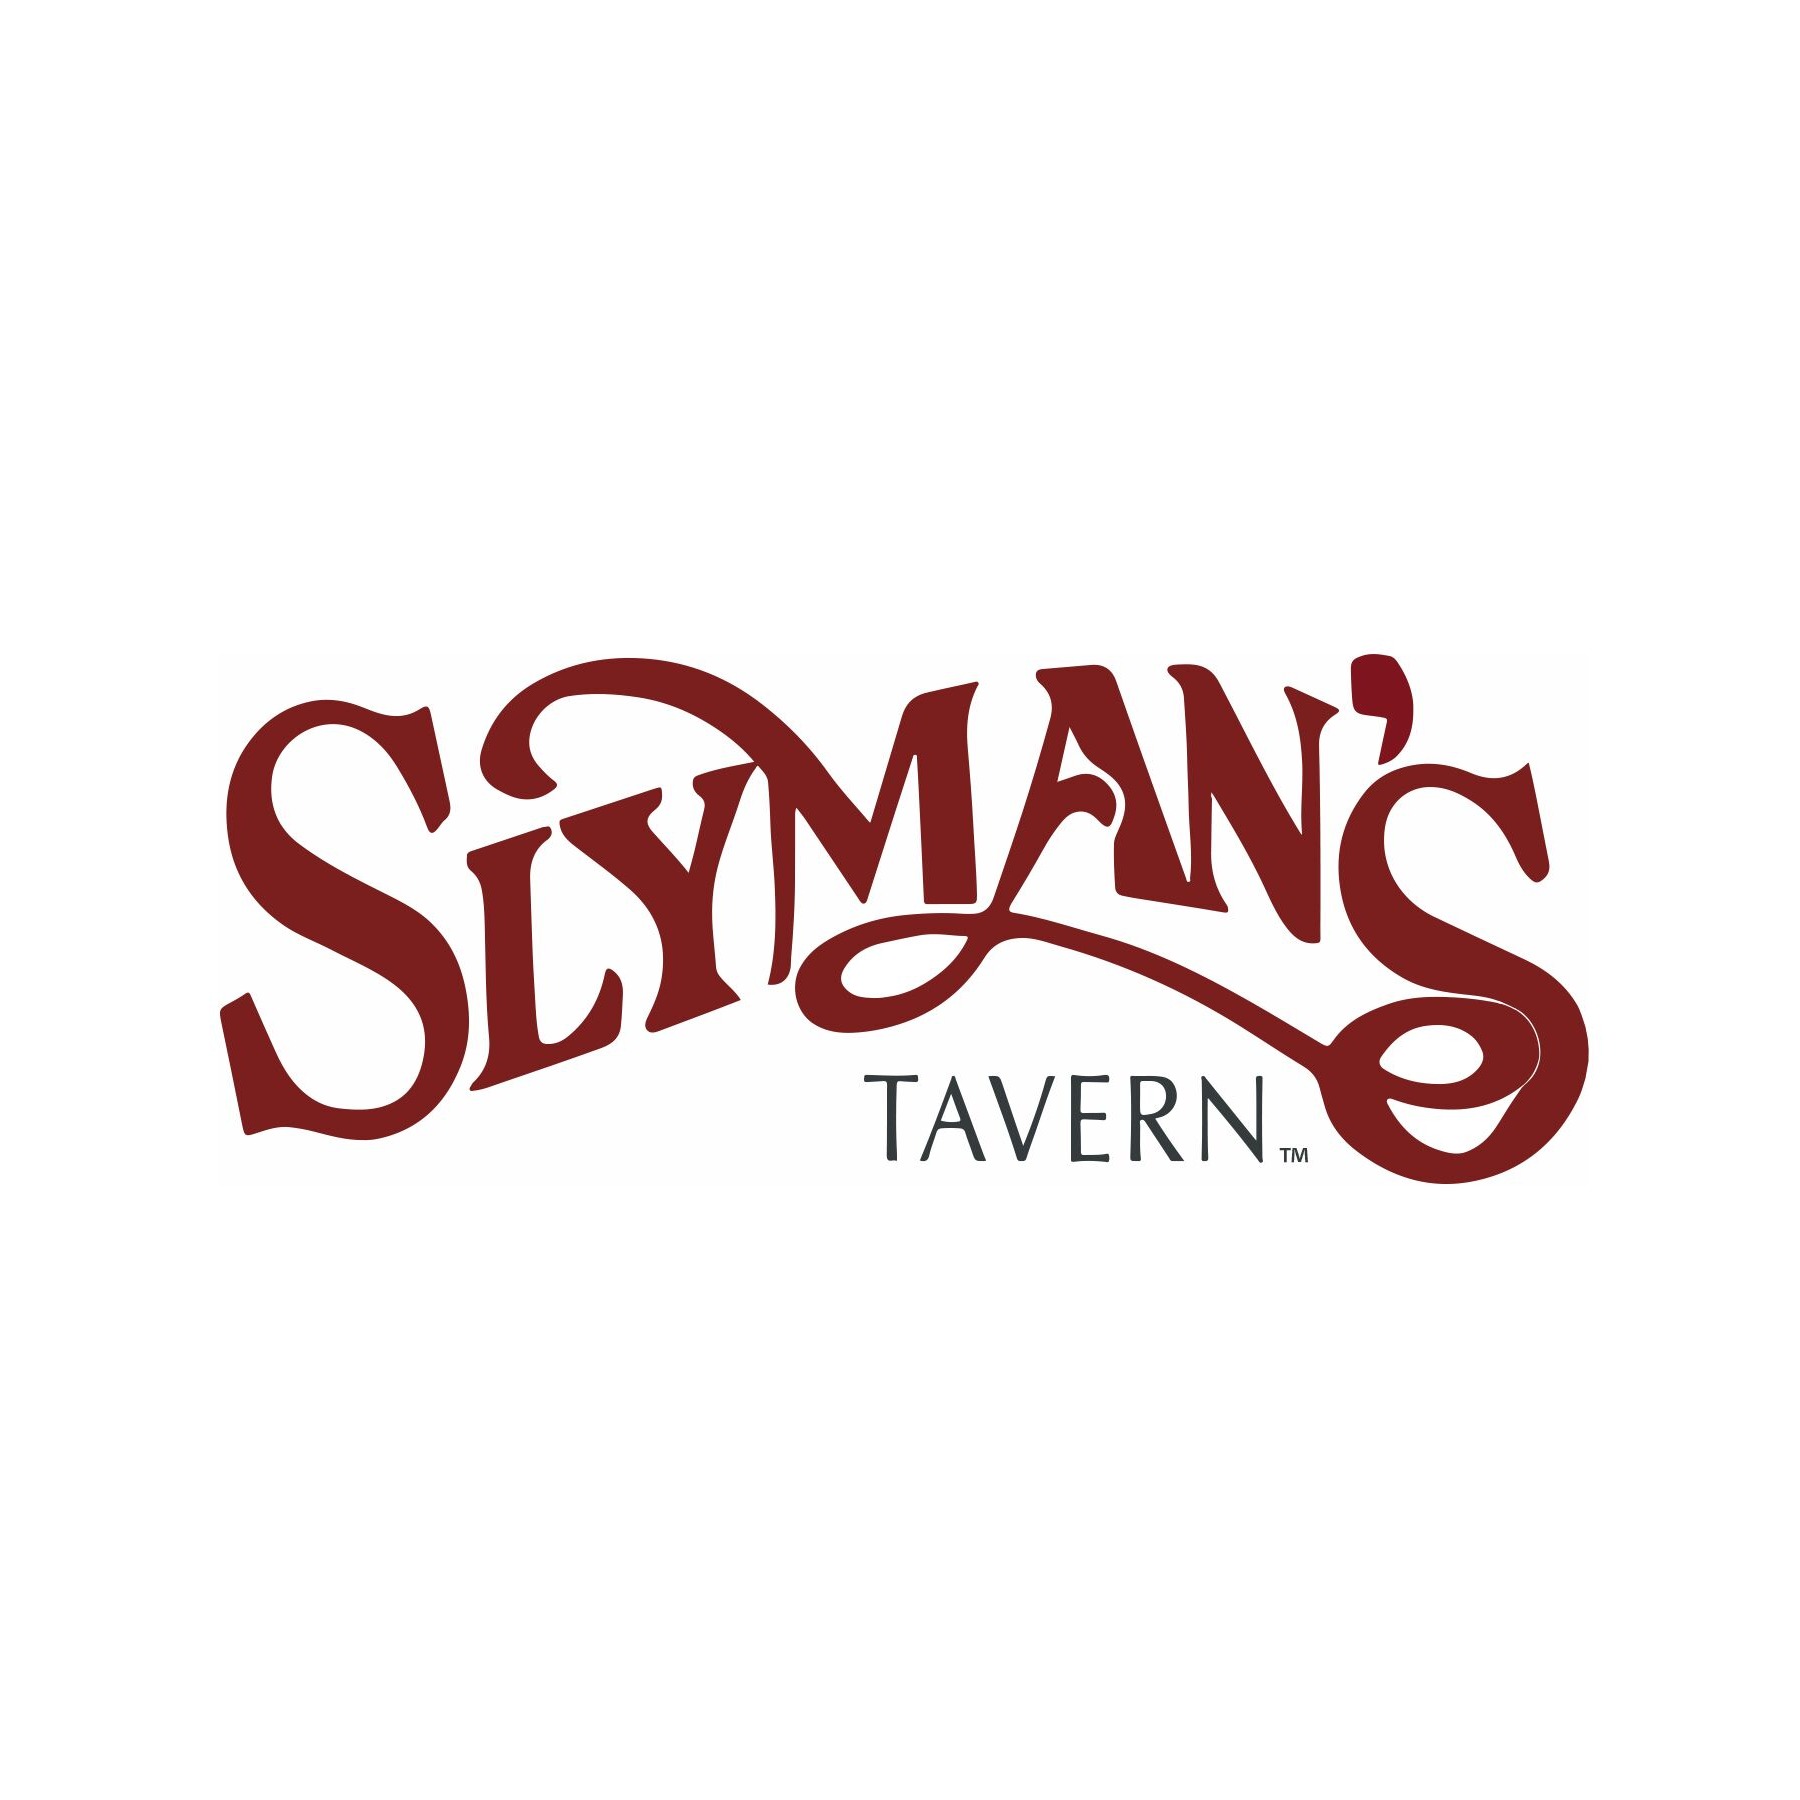 Slyman's Tavern - Dine-in, Delivery & Takeout Available